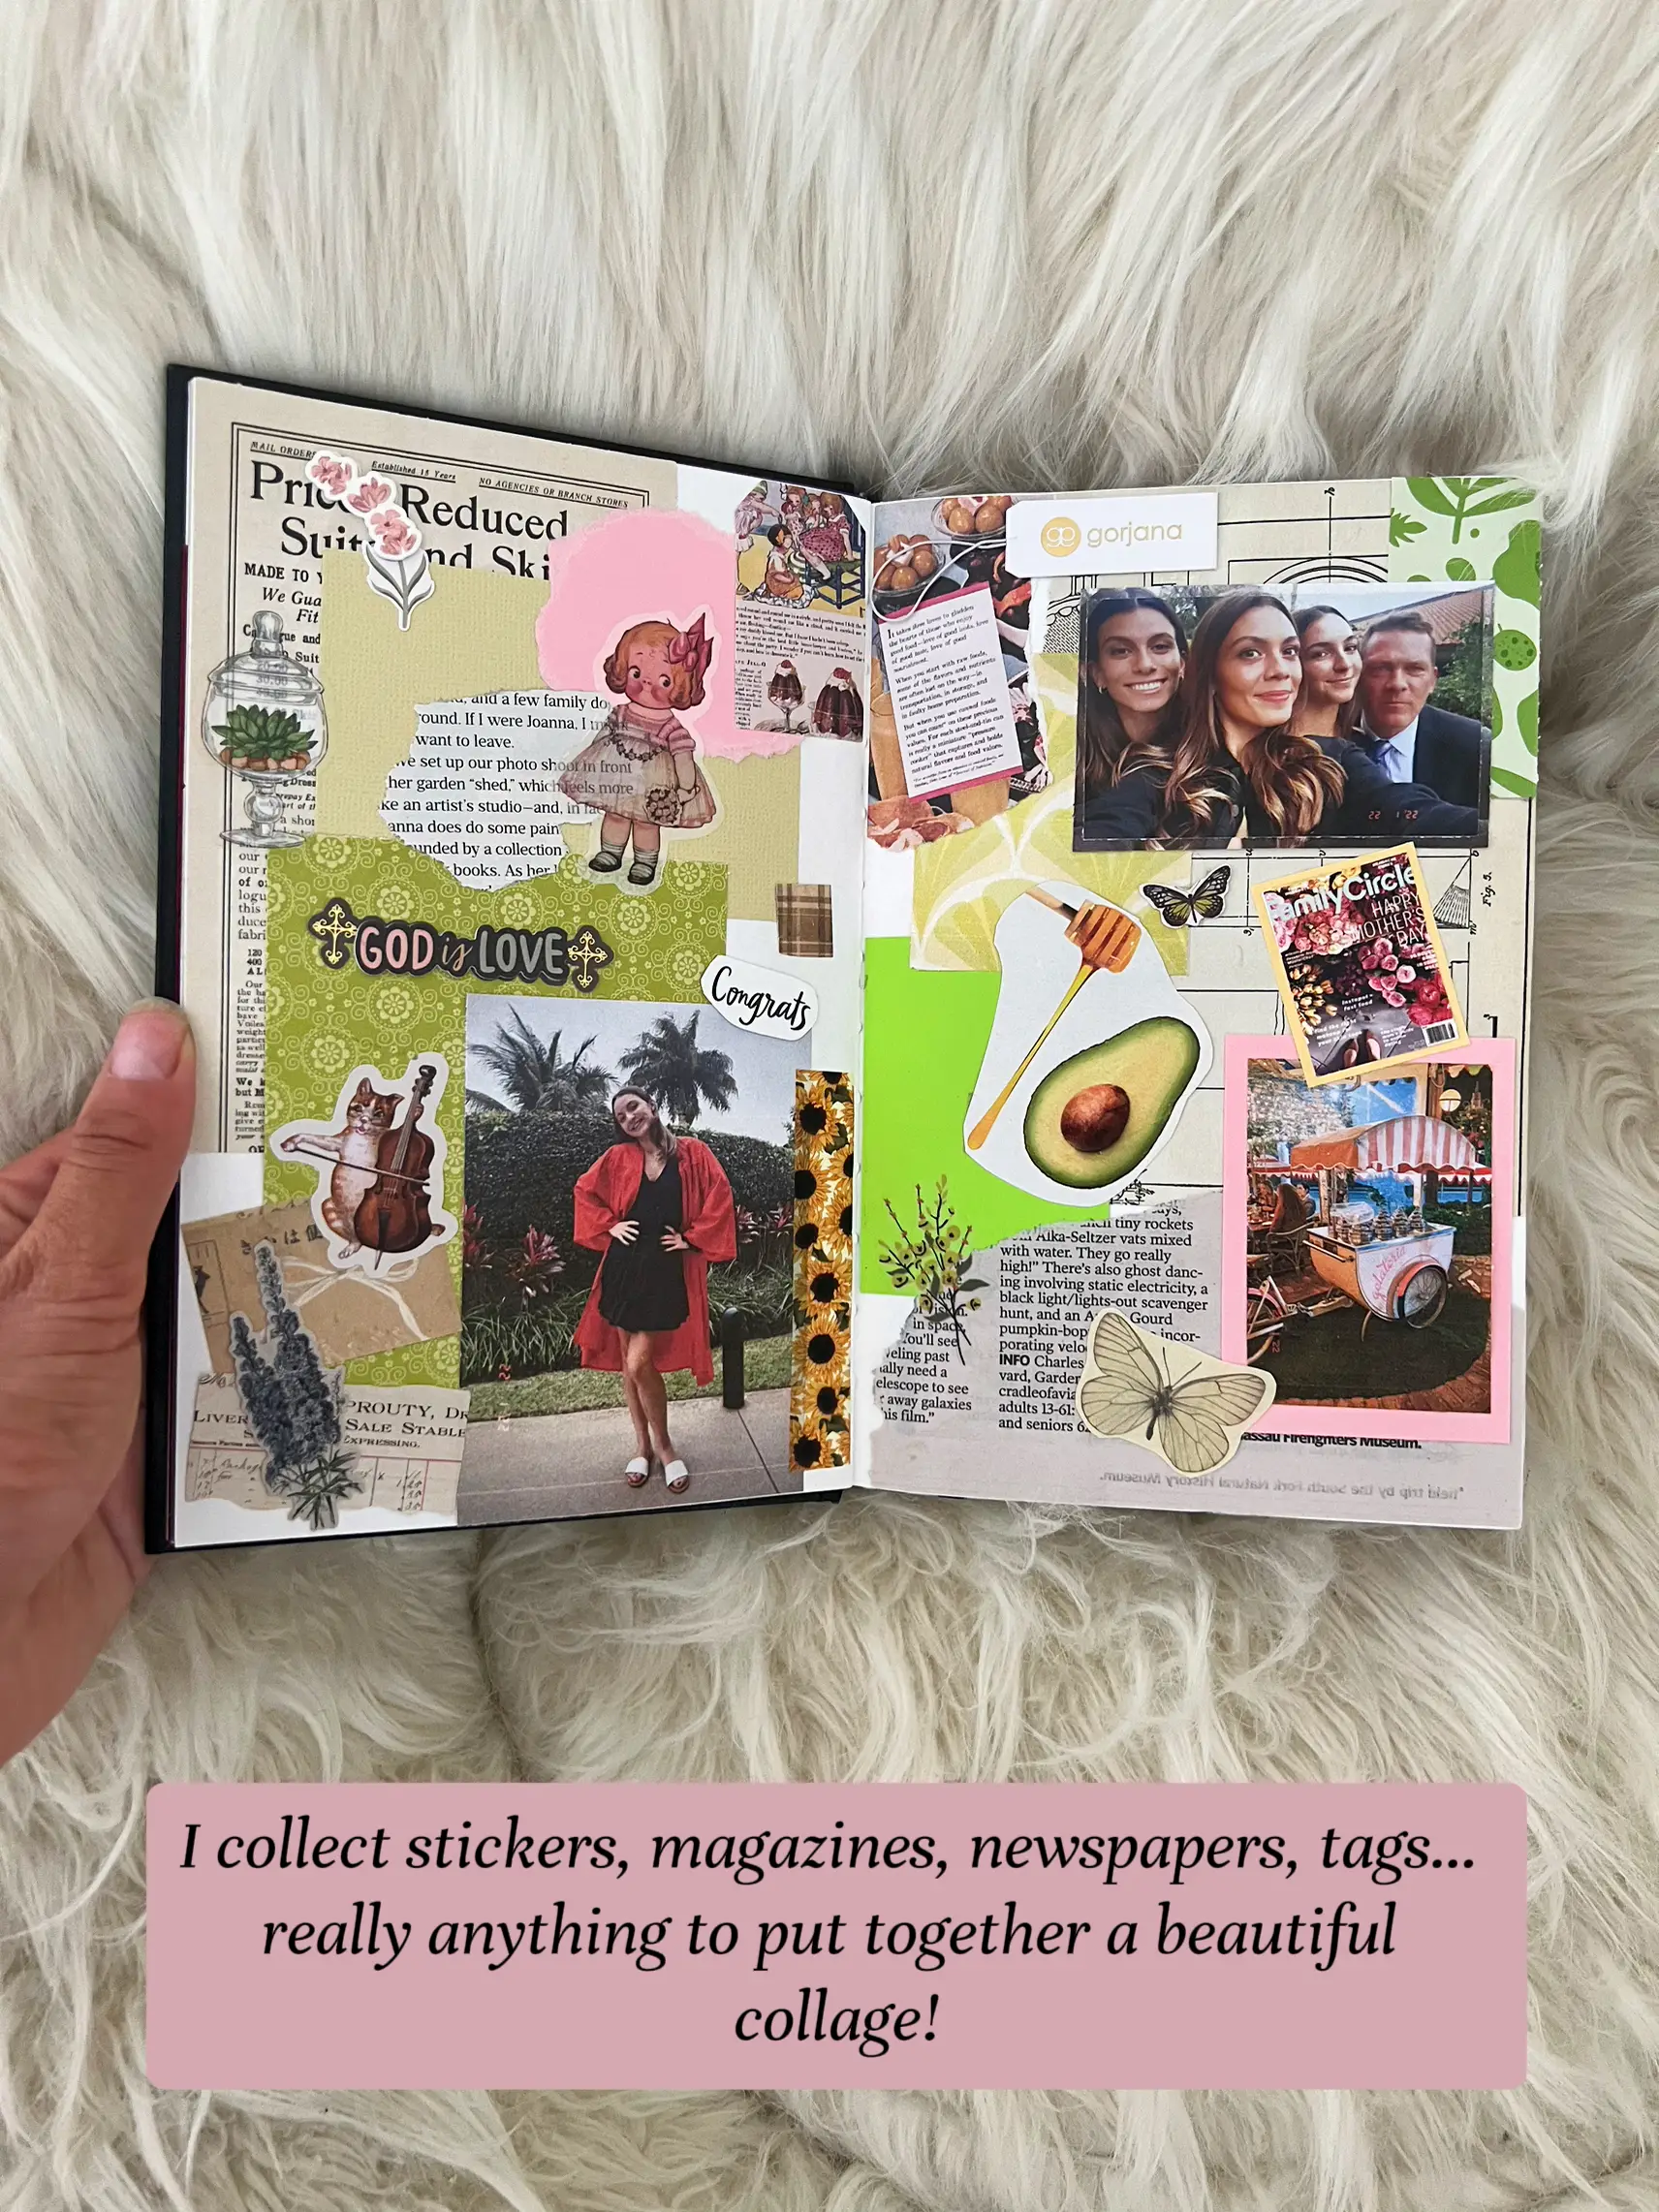 Year one of our love story - Our First Year Together: couples relationship  photo journal scrapbook (Couples yearly relationship journal scrapbooks)